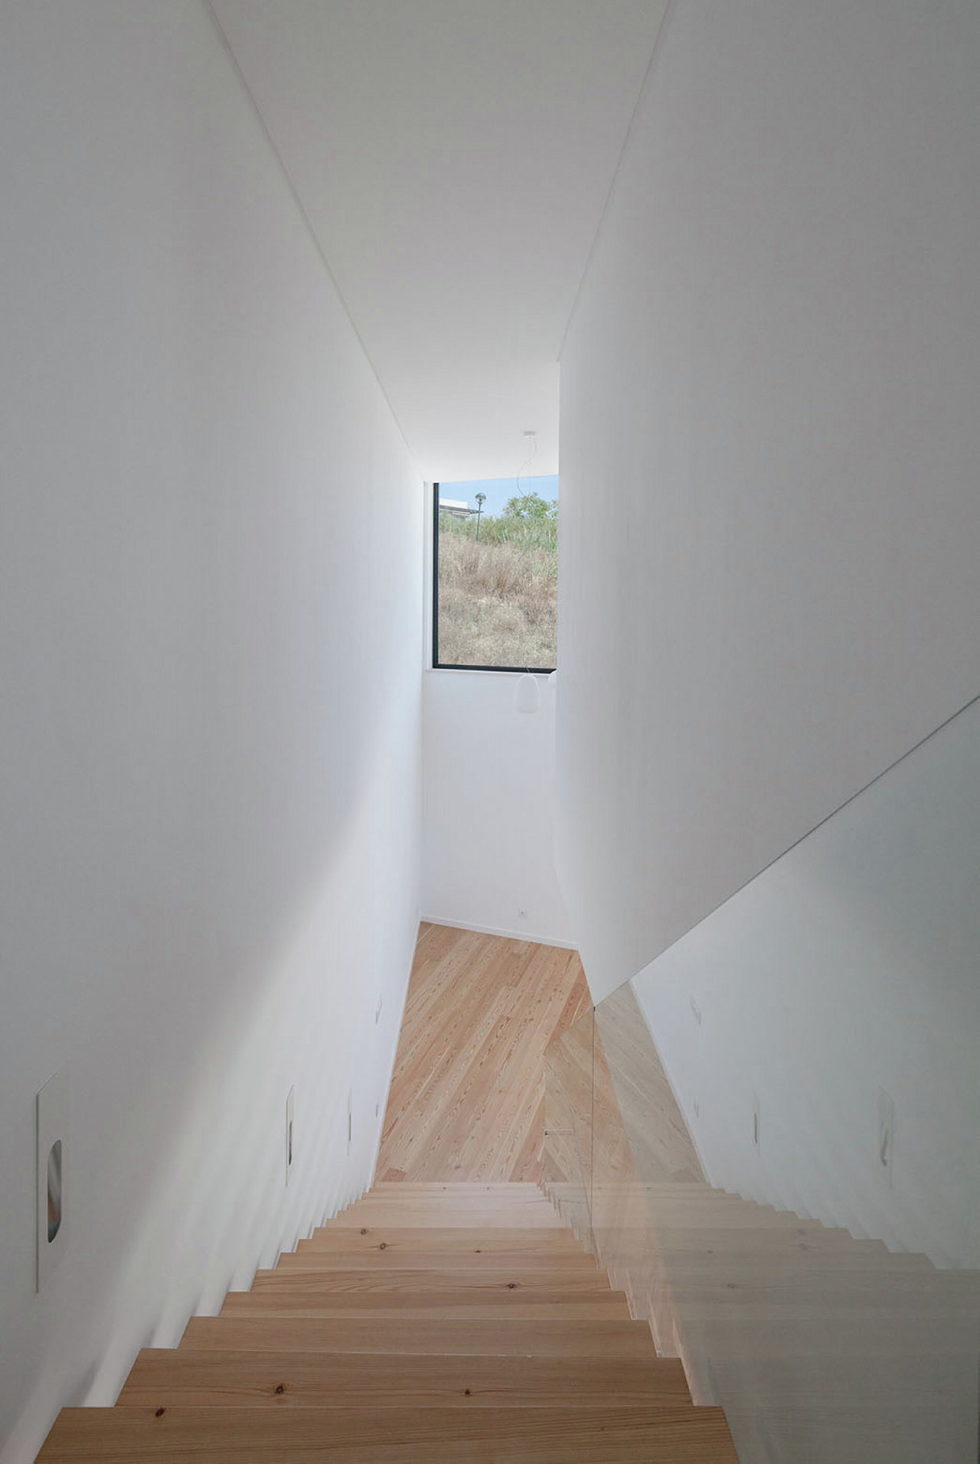 JC House Villa At The Suburb Of Lisbon, Portugal, Upon The Project Of JPS Atelier 16